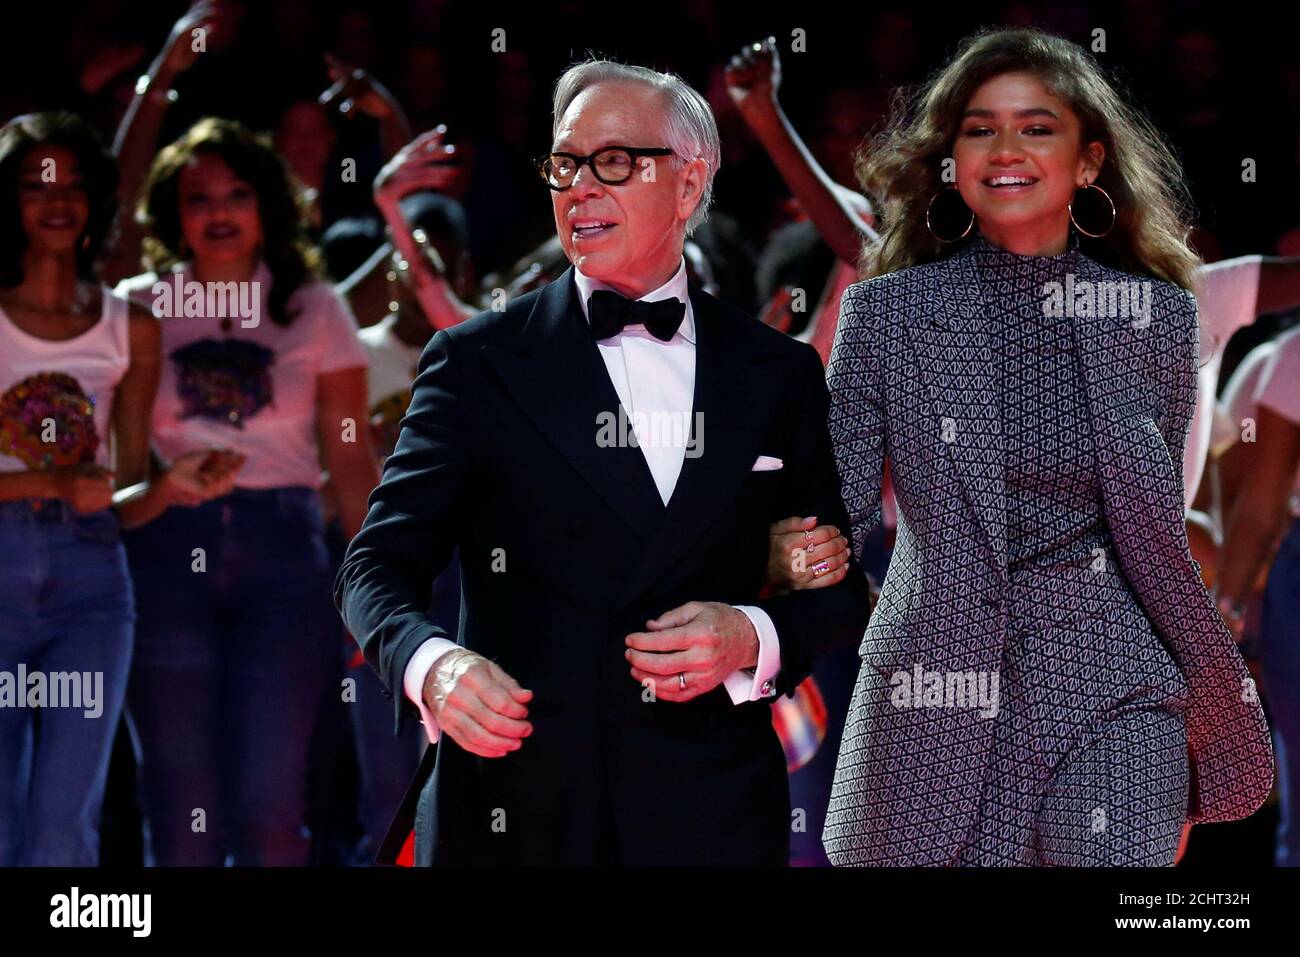 Designer Tommy Hilfiger appears with Zendaya at his Fall/Winter 2019-2020  women's ready-to-wear collection show during the Paris Fashion Week in Paris,  France, March 2, 2019. REUTERS/Regis Duvignau Stock Photo - Alamy